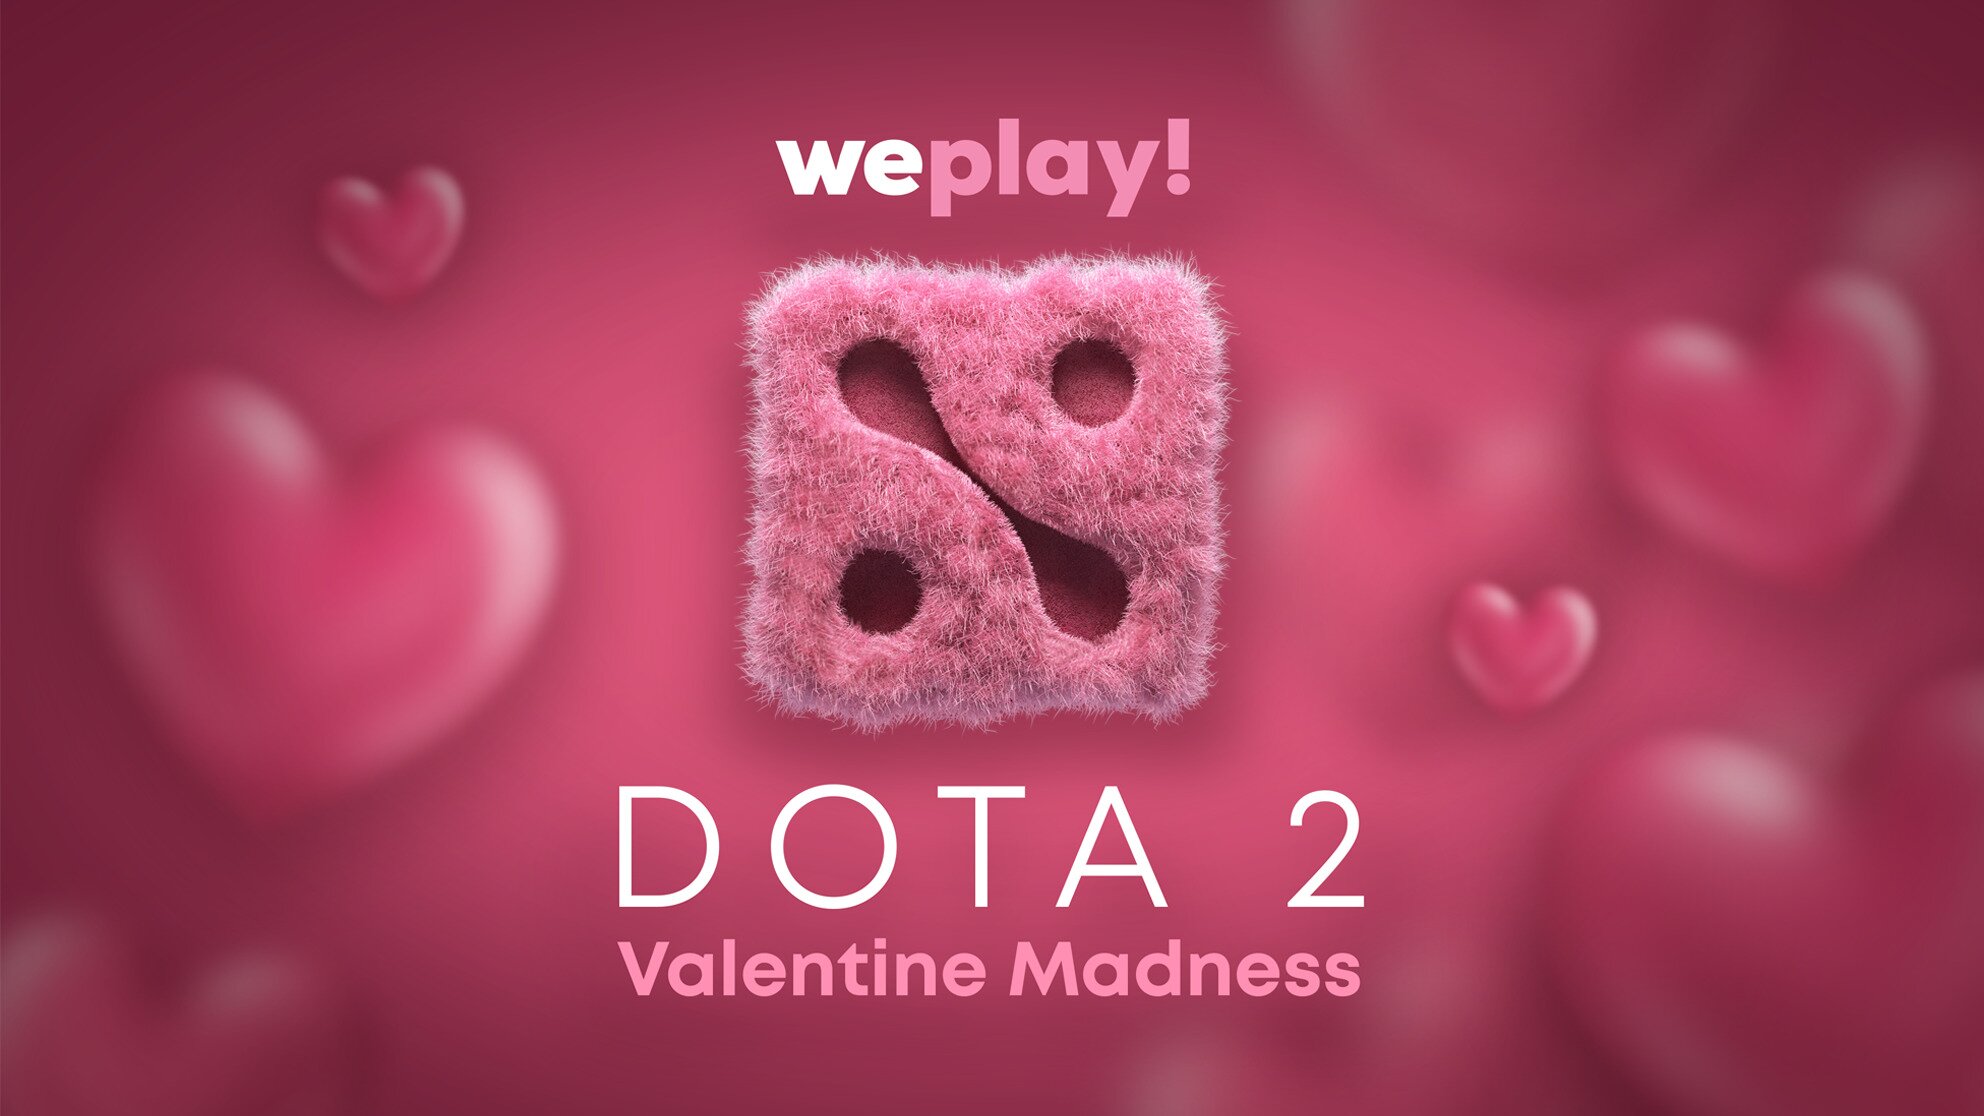 If you were looking for a way to spend Valentine’s Day weekend, WePlay! will host their Dota 2 Madness tournament - Valentine Madness - from February 9-16.